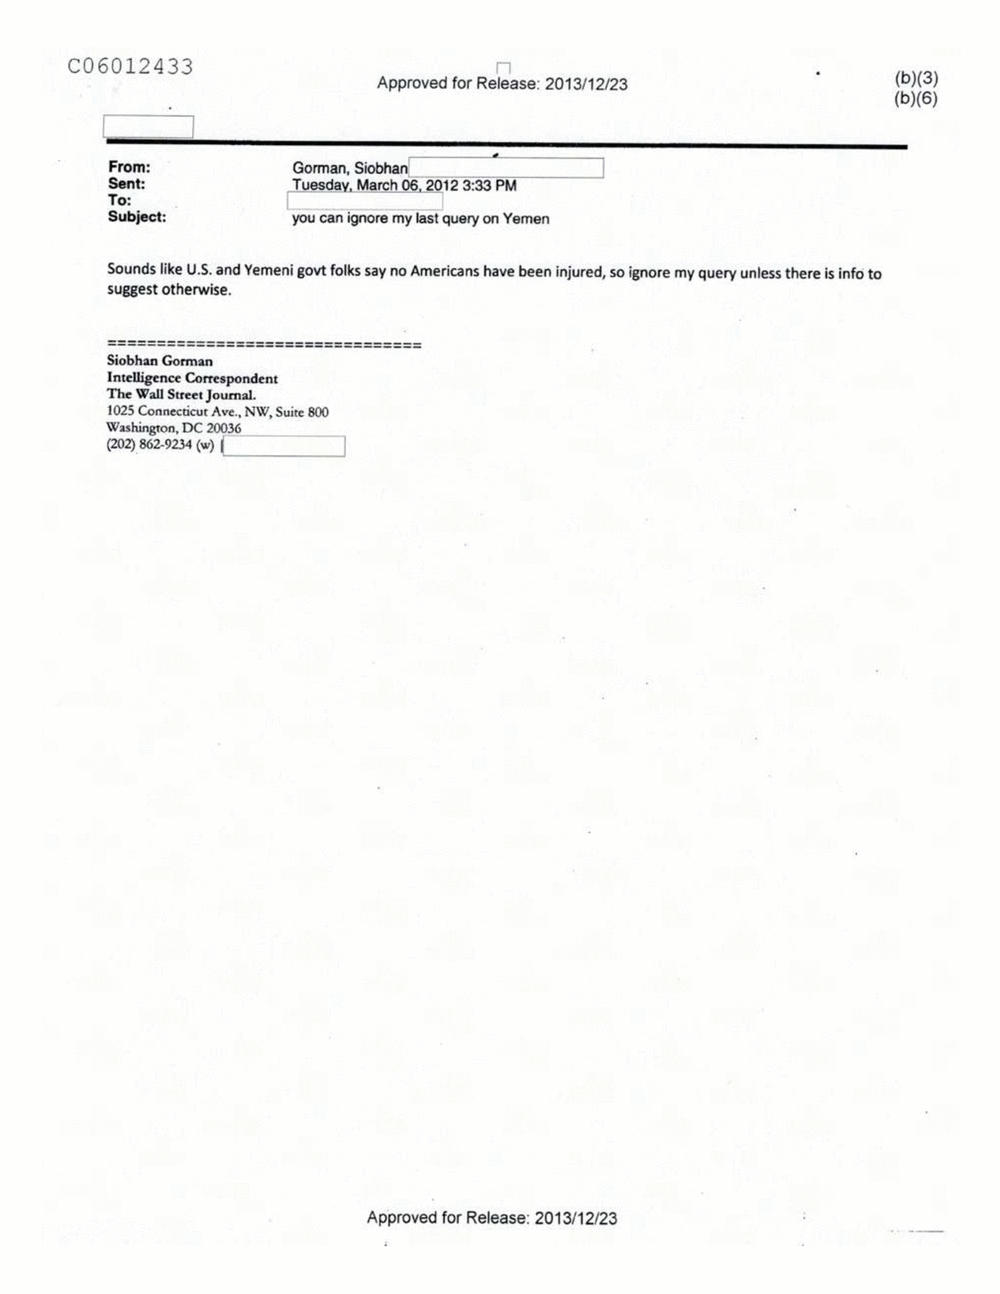 Page 12 from Email Correspondence Between Reporters and CIA Flacks